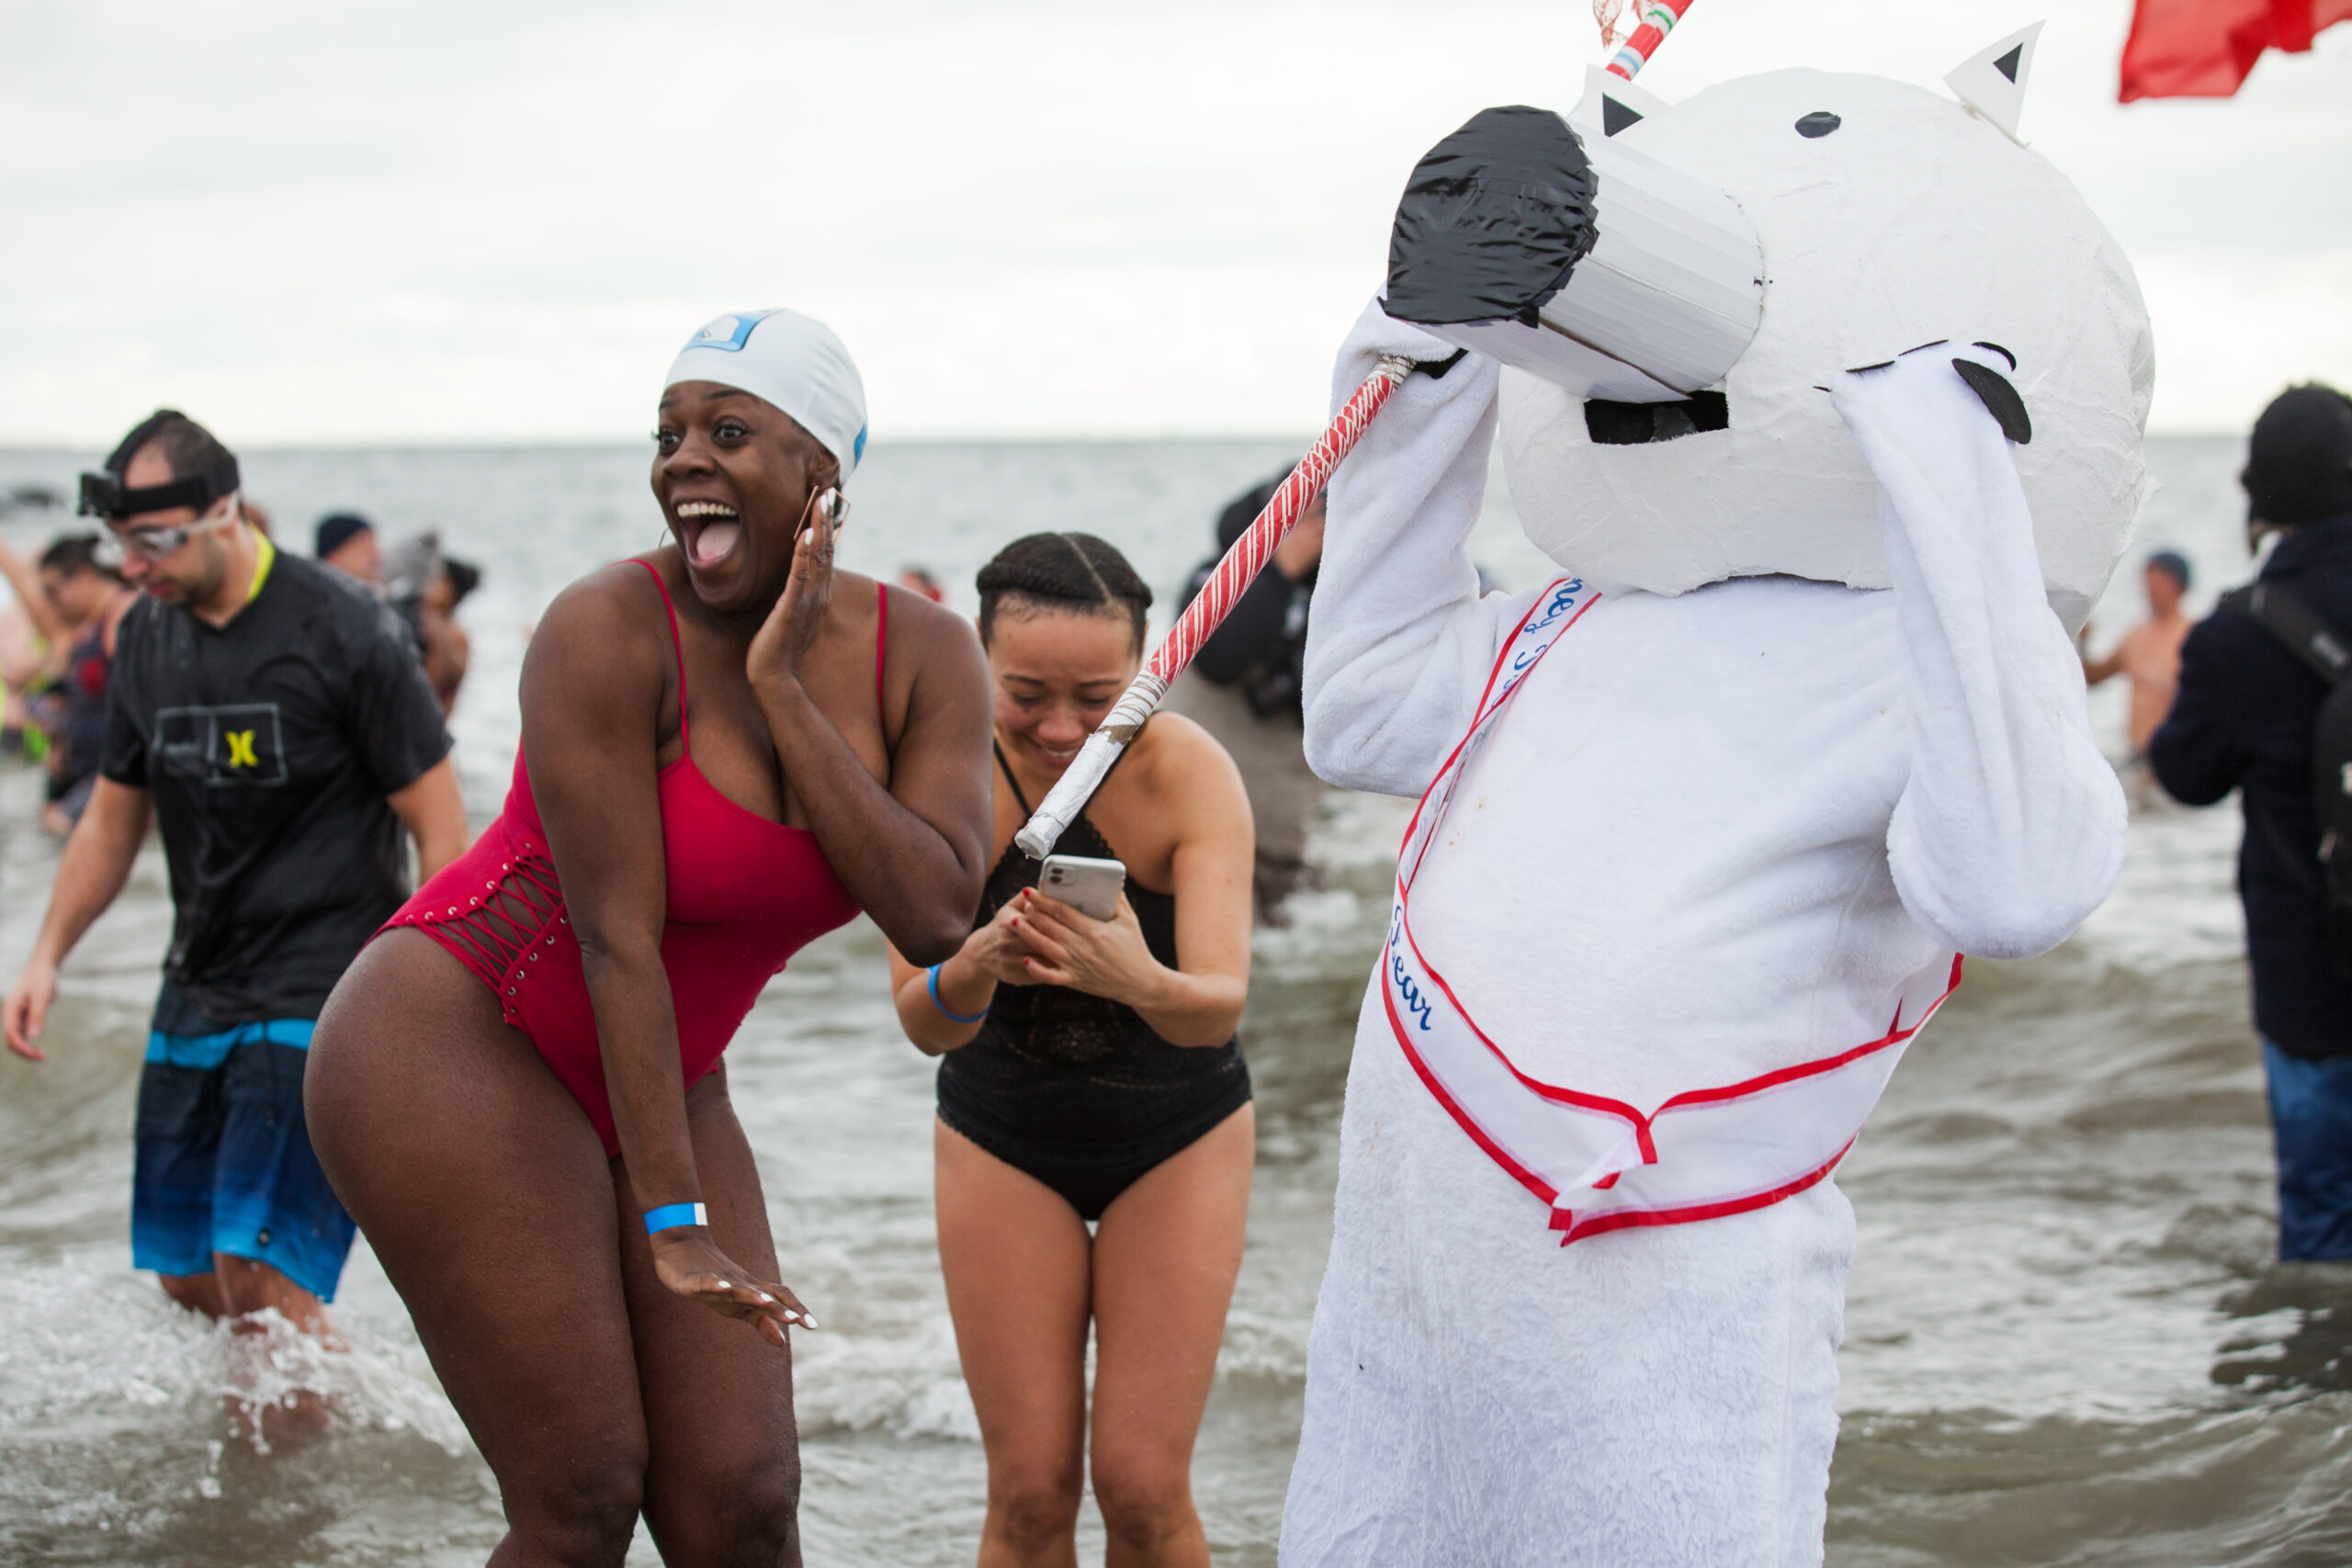 The plunge is hosted by the Coney Island Polar Bear Club, a water bathing organization that swims in the Atlantic off Coney every Sunday from November to April.